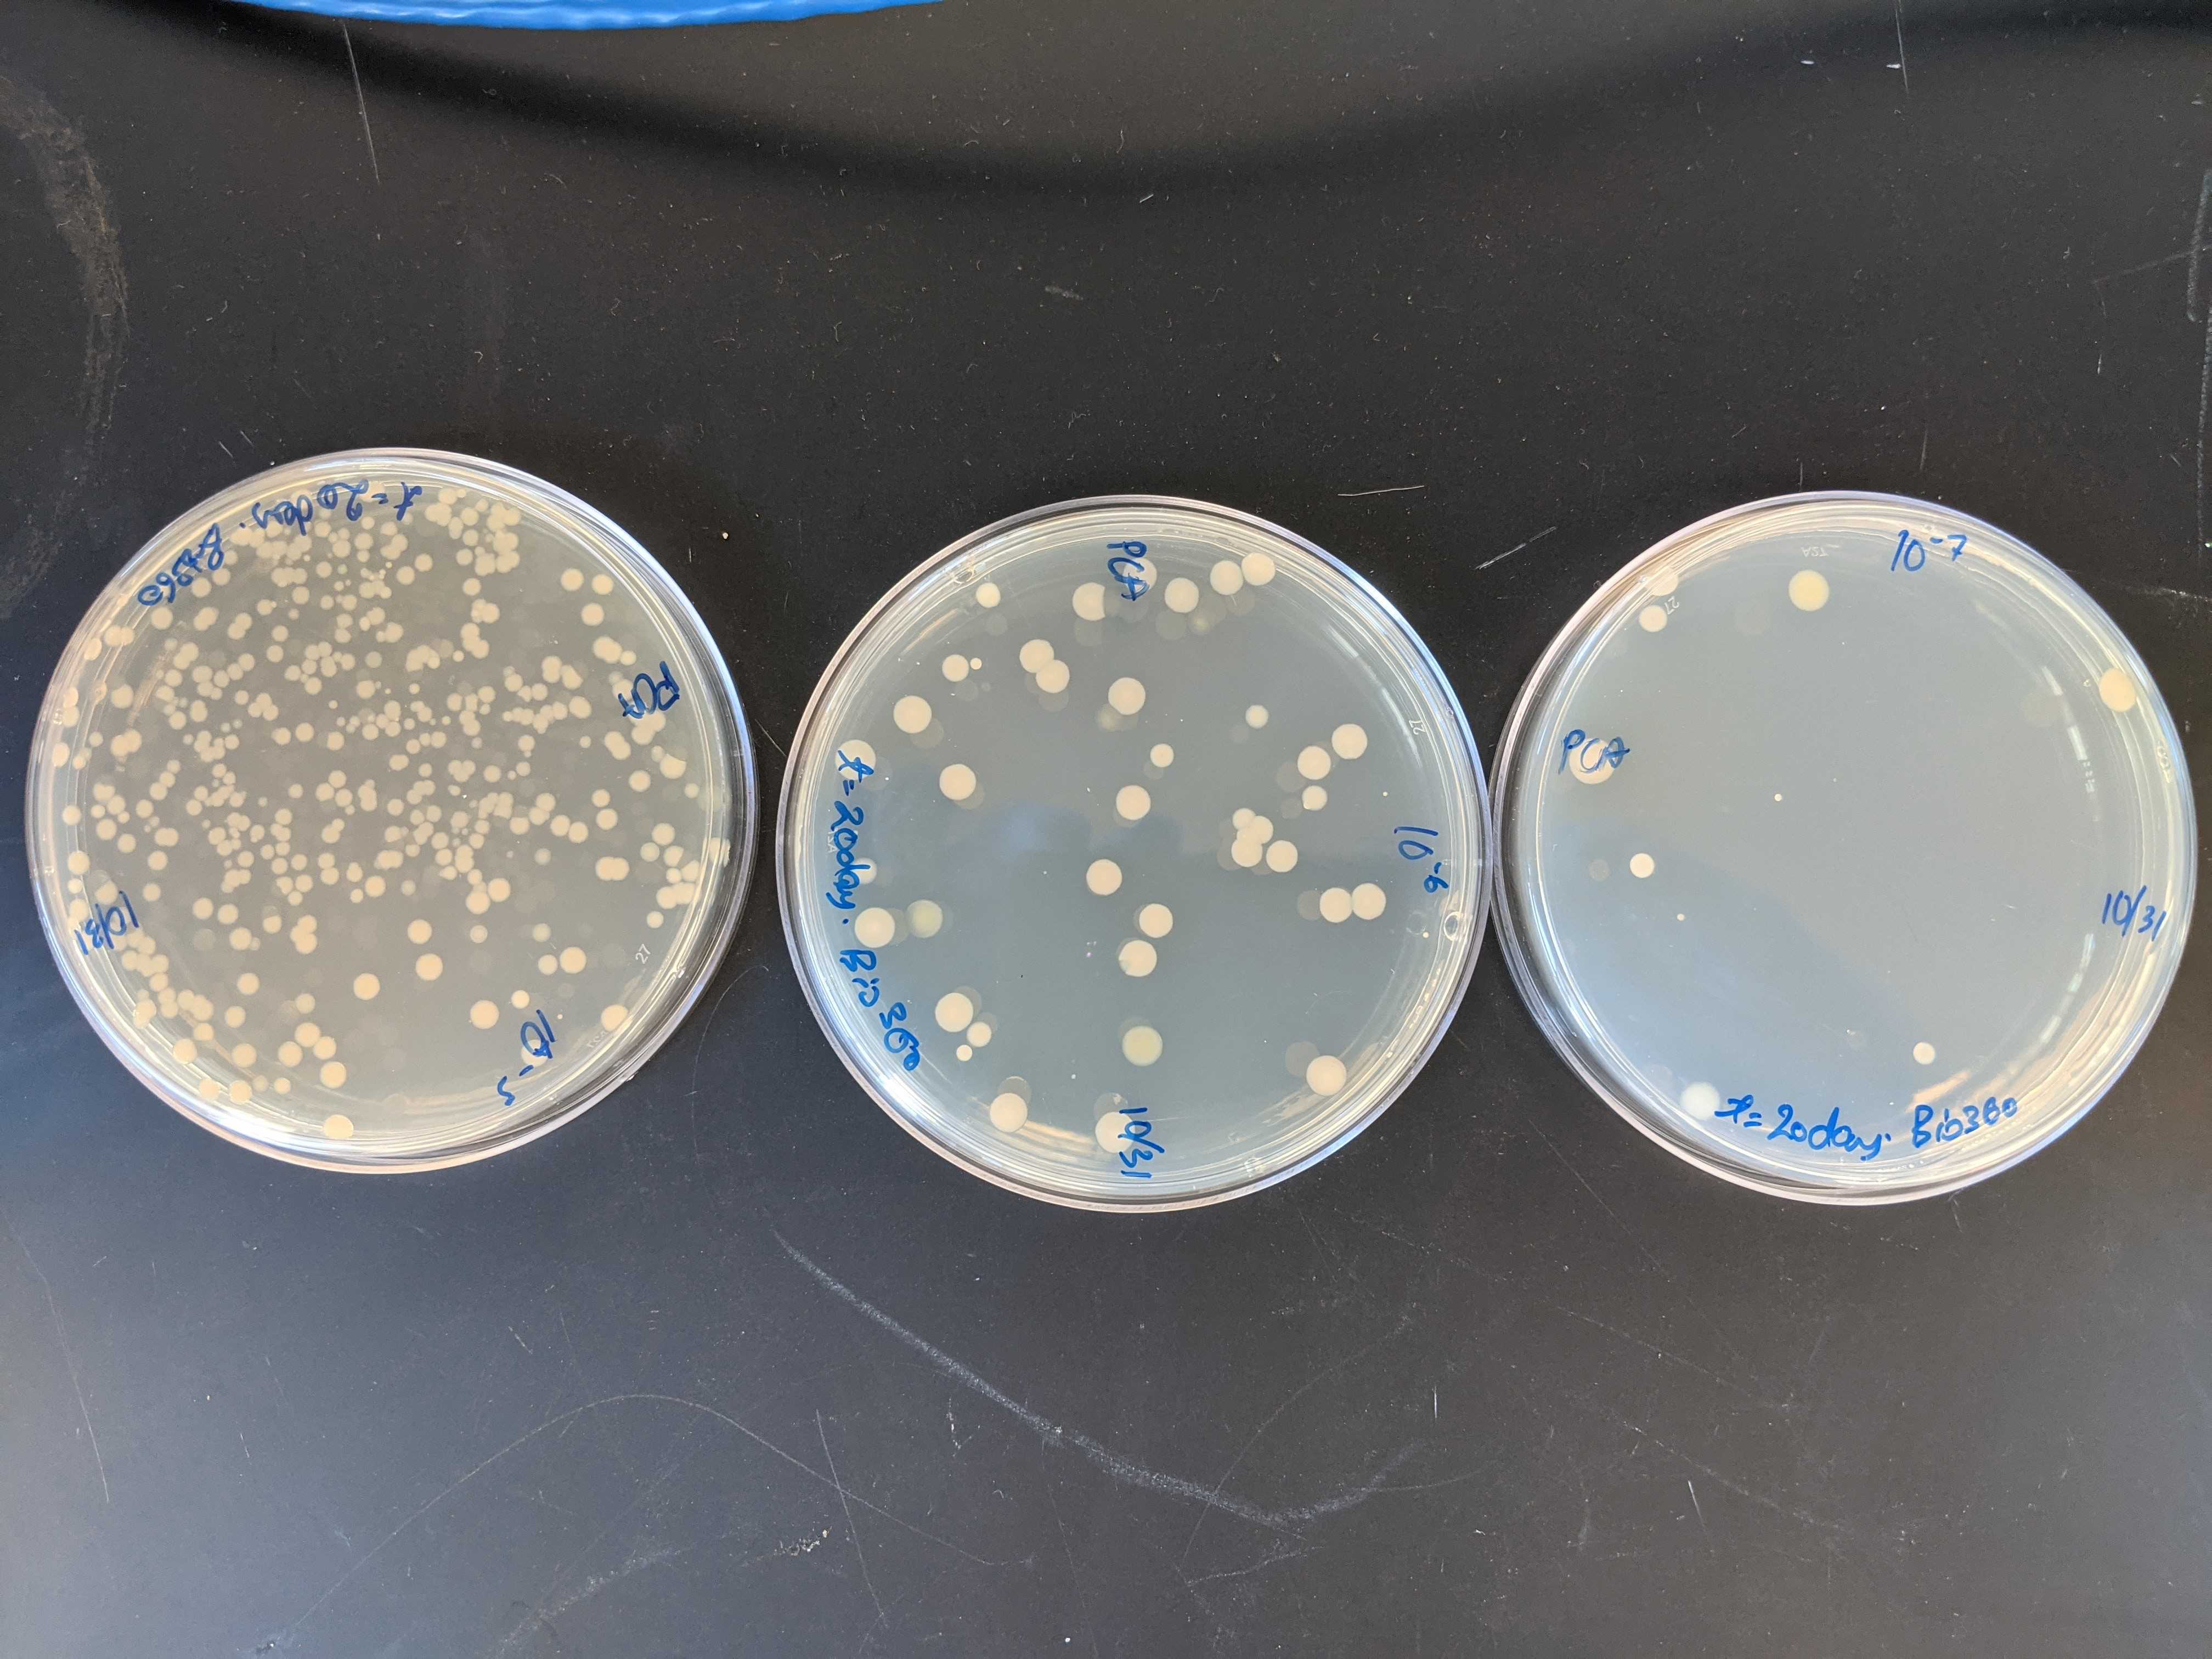 Agar plates with cell counts